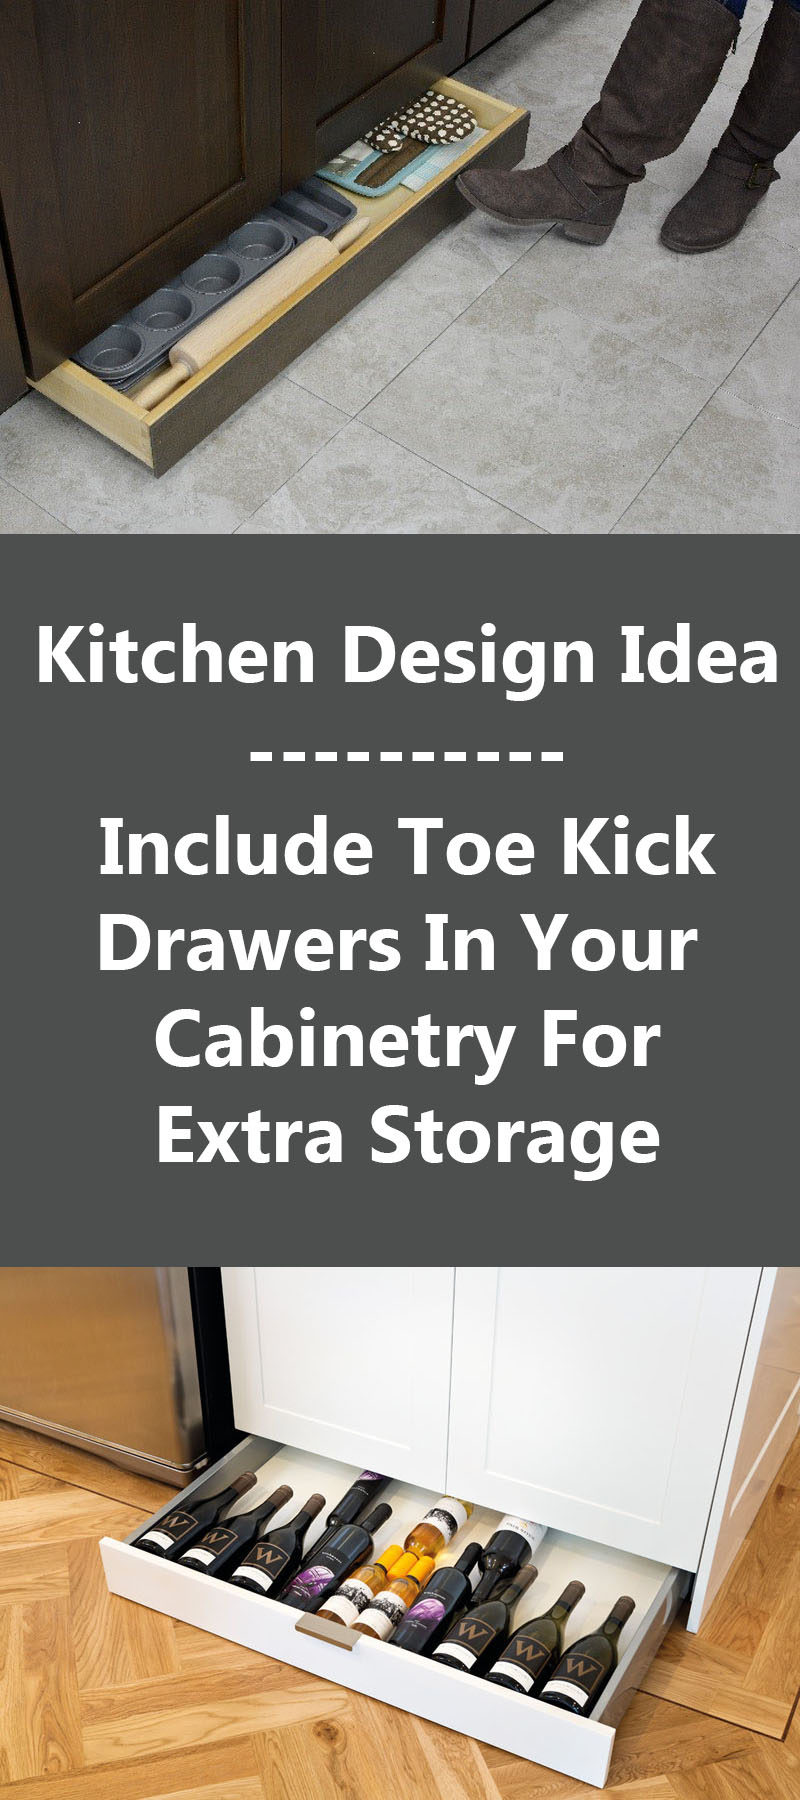 Kitchen Design Idea - Include Toe Kick Drawers In Your Cabinetry For Extra Storage